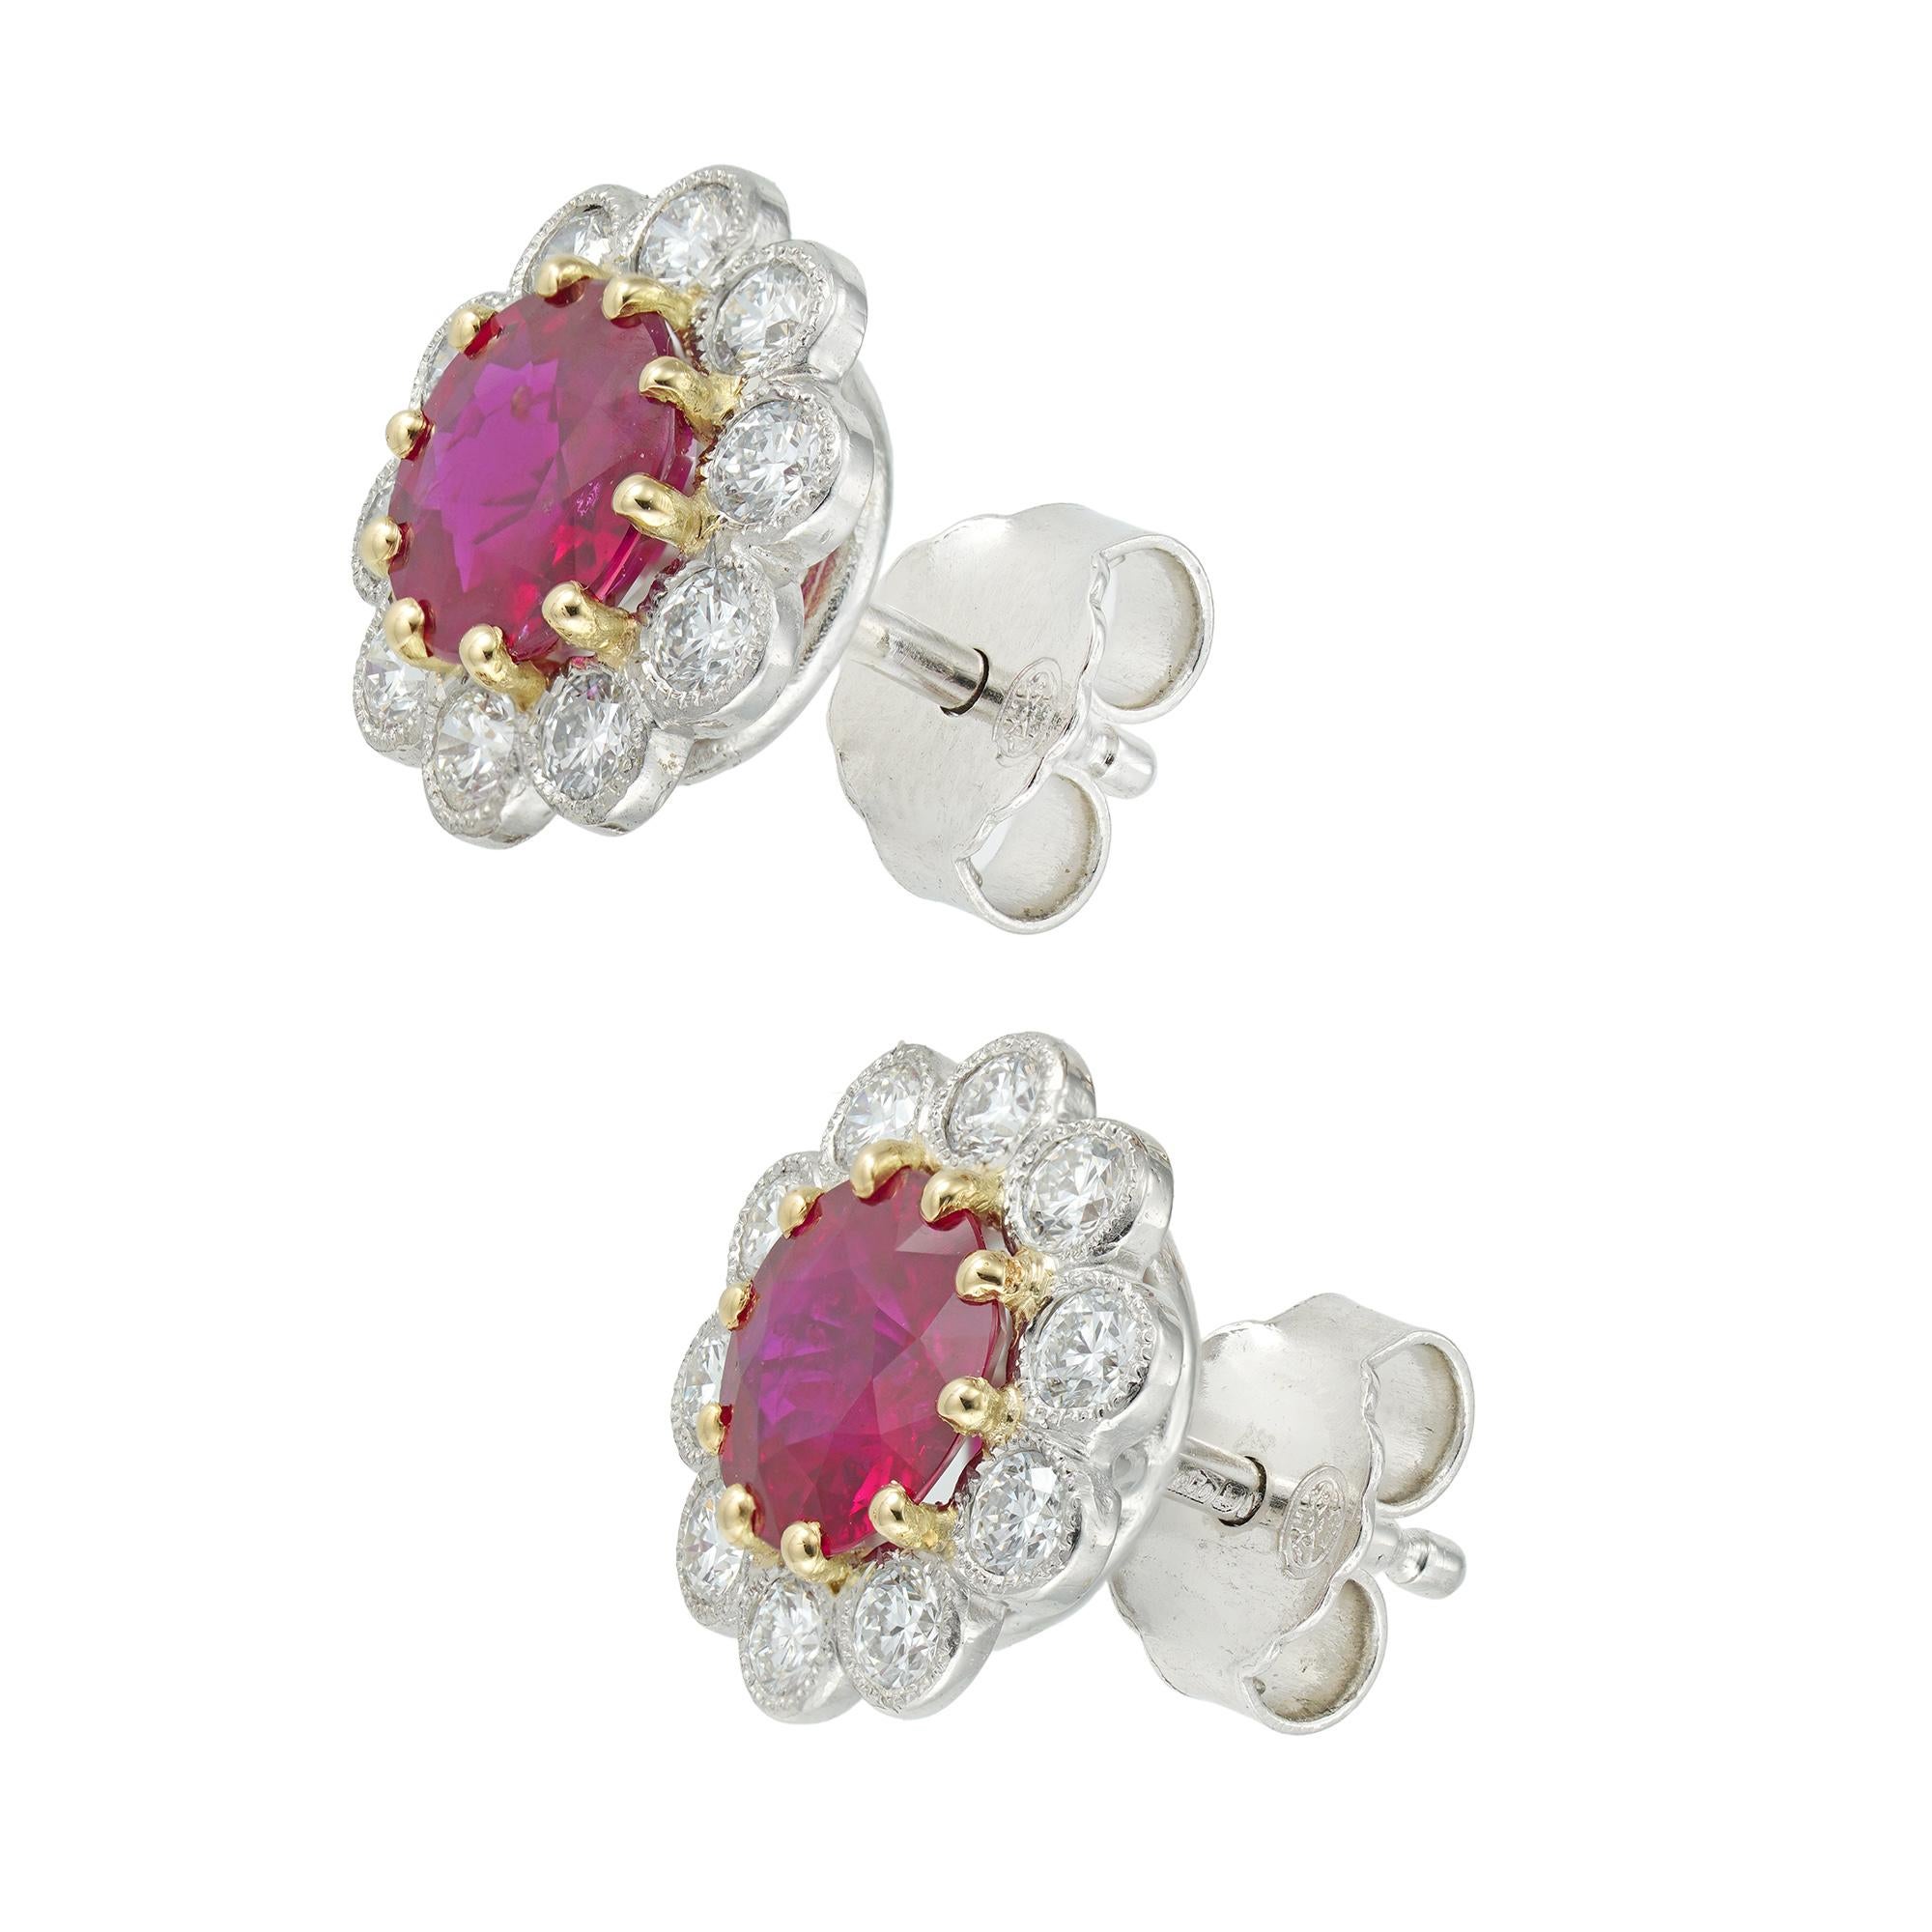 A pair of ruby and diamond cluster earrings, each earring in the form of a flower-head, centrally set with a round faceted emerald four claw-set in yellow gold, surrounded by ten platinum petals, each petal set with a round brilliant-cut diamond,